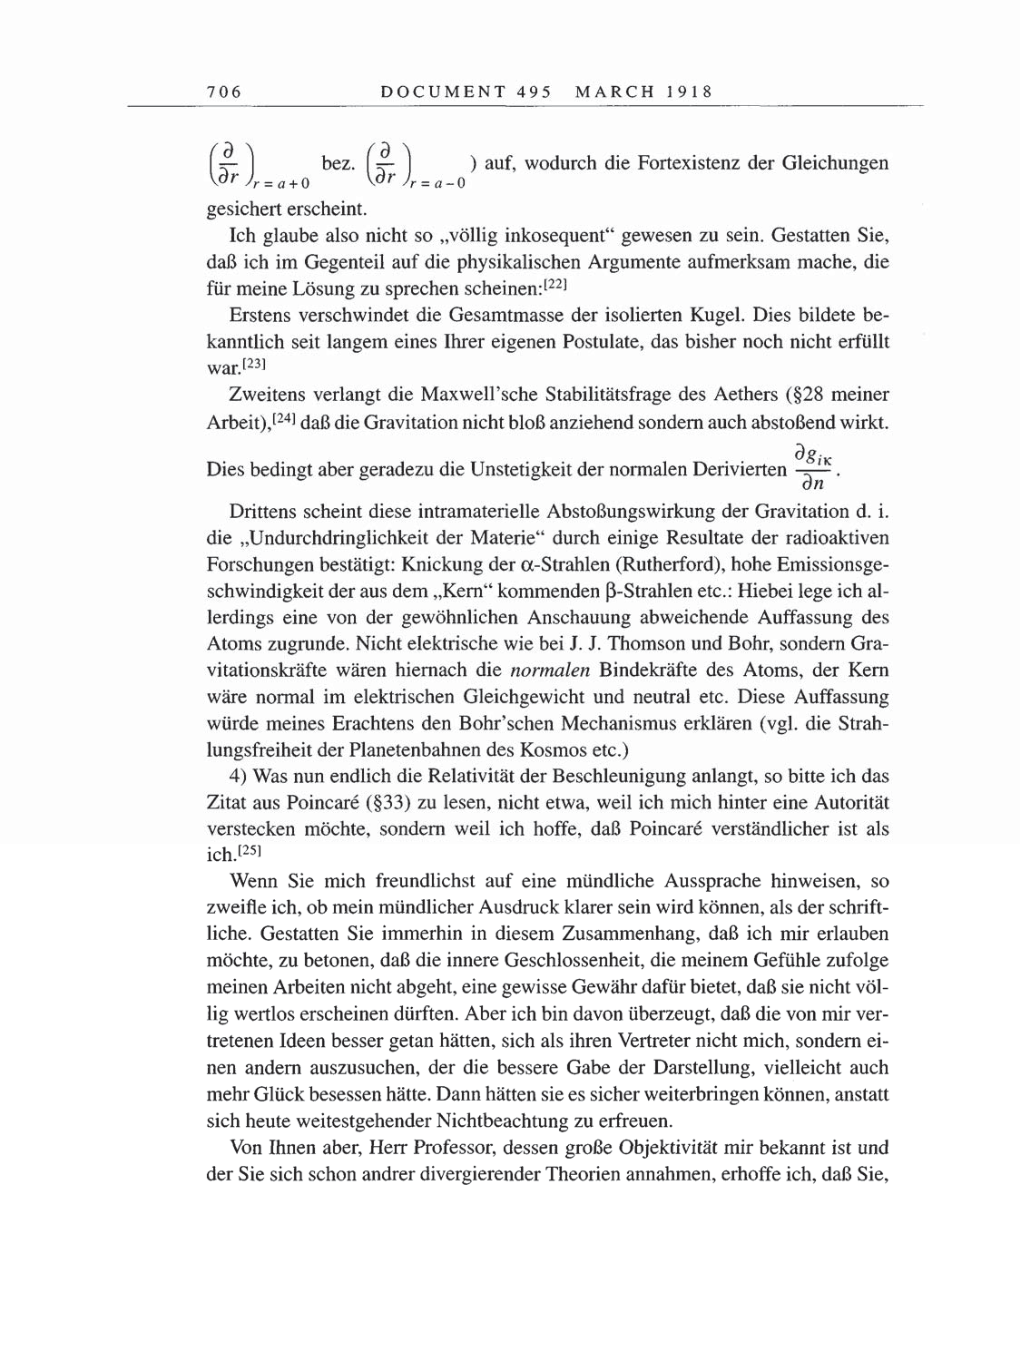 Volume 8, Part B: The Berlin Years: Correspondence 1918 page 706